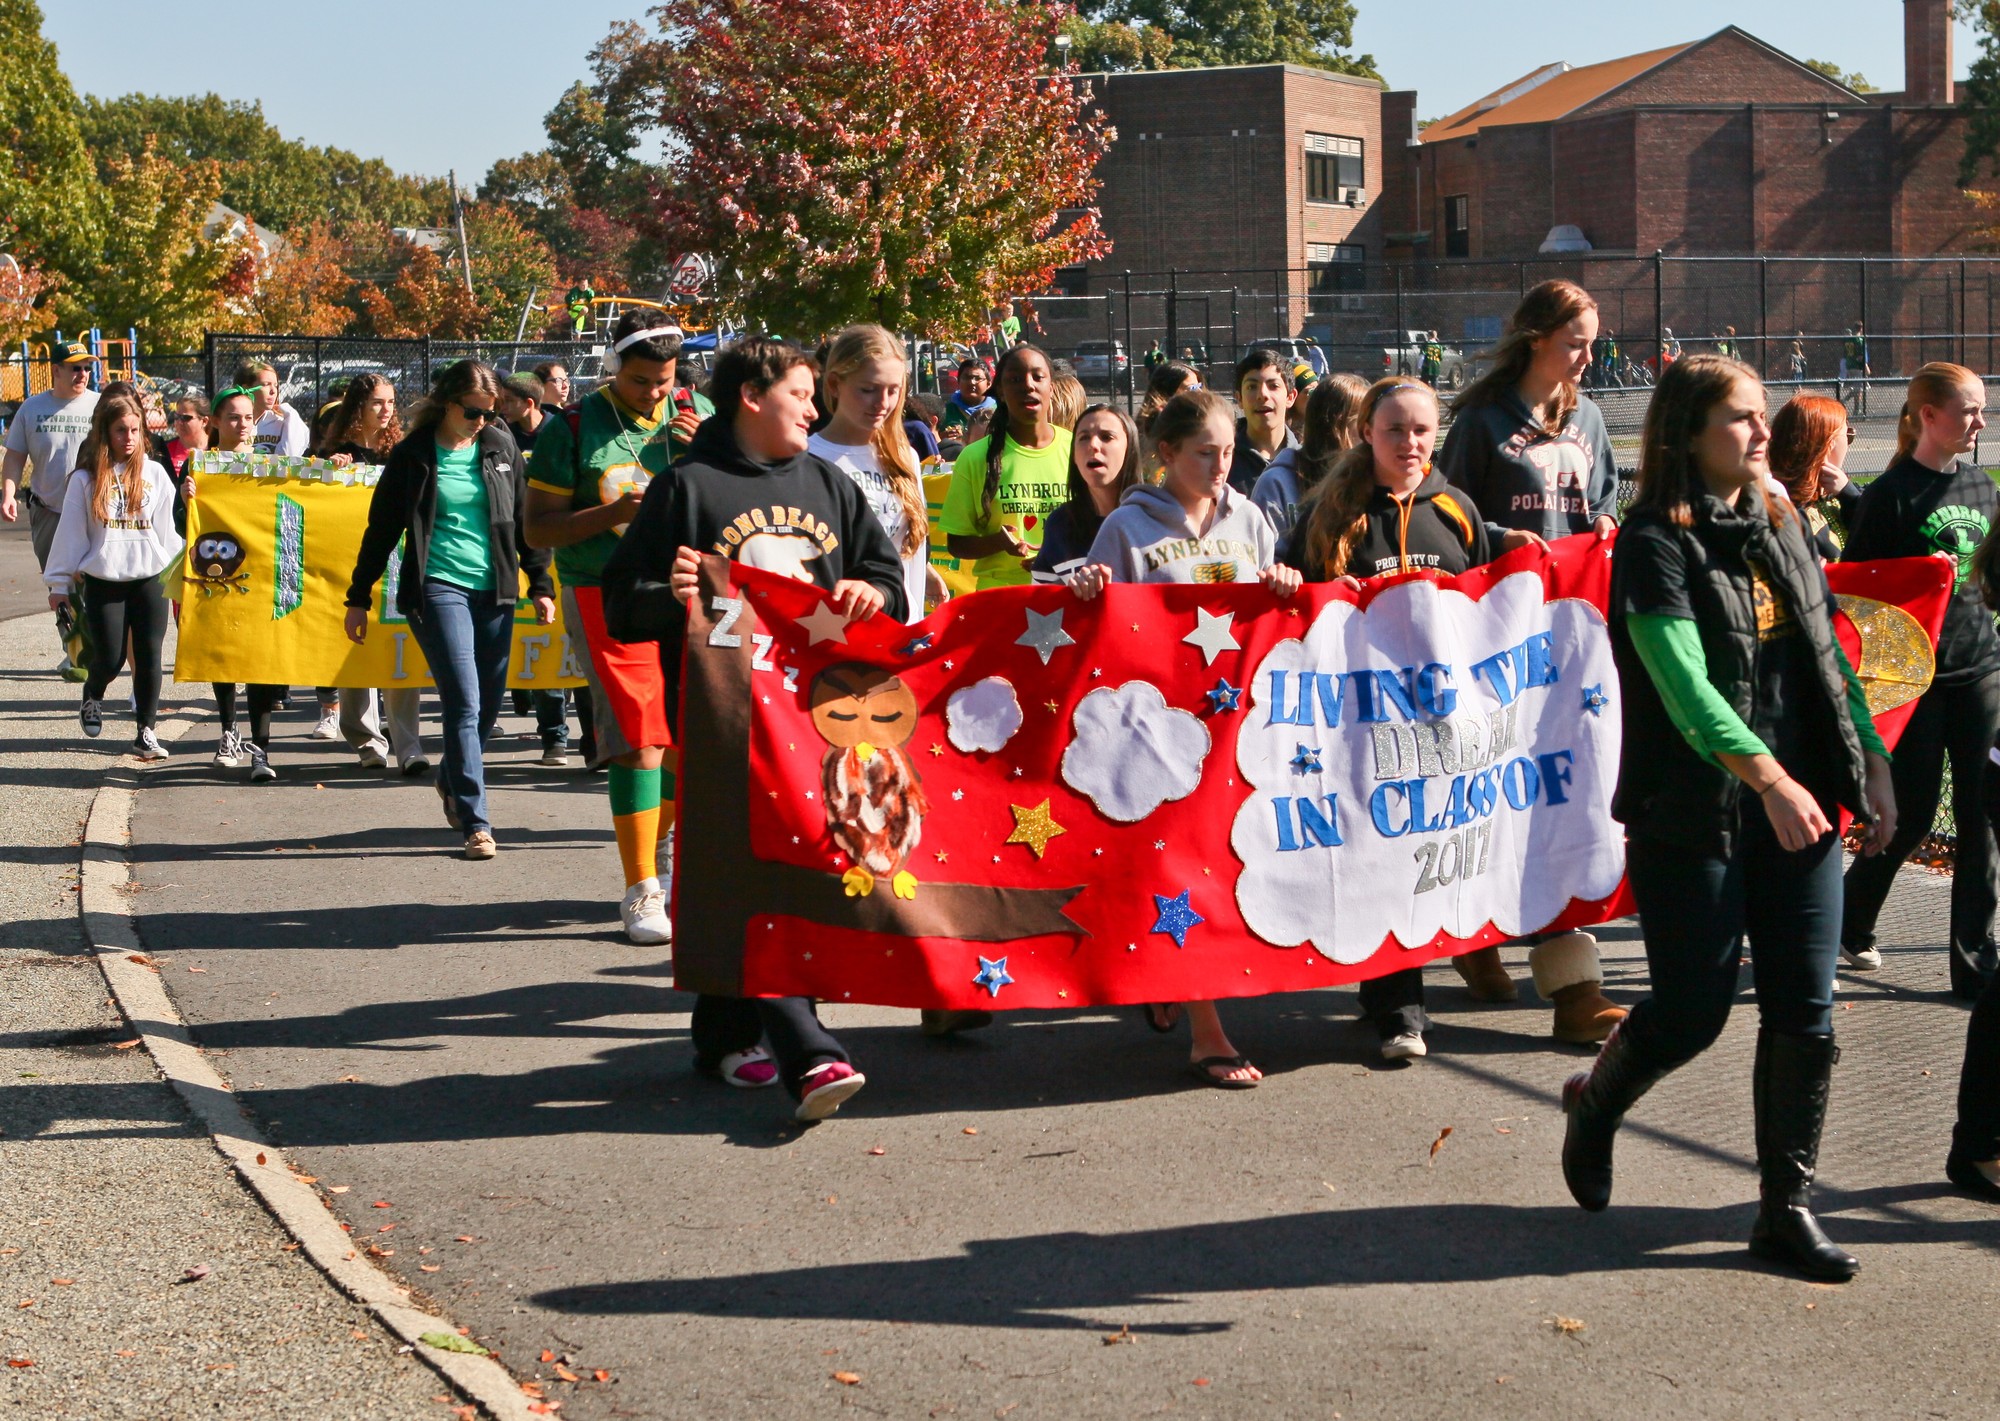 The Lynbrook High School sophomores with their banner for the homecoming parade.